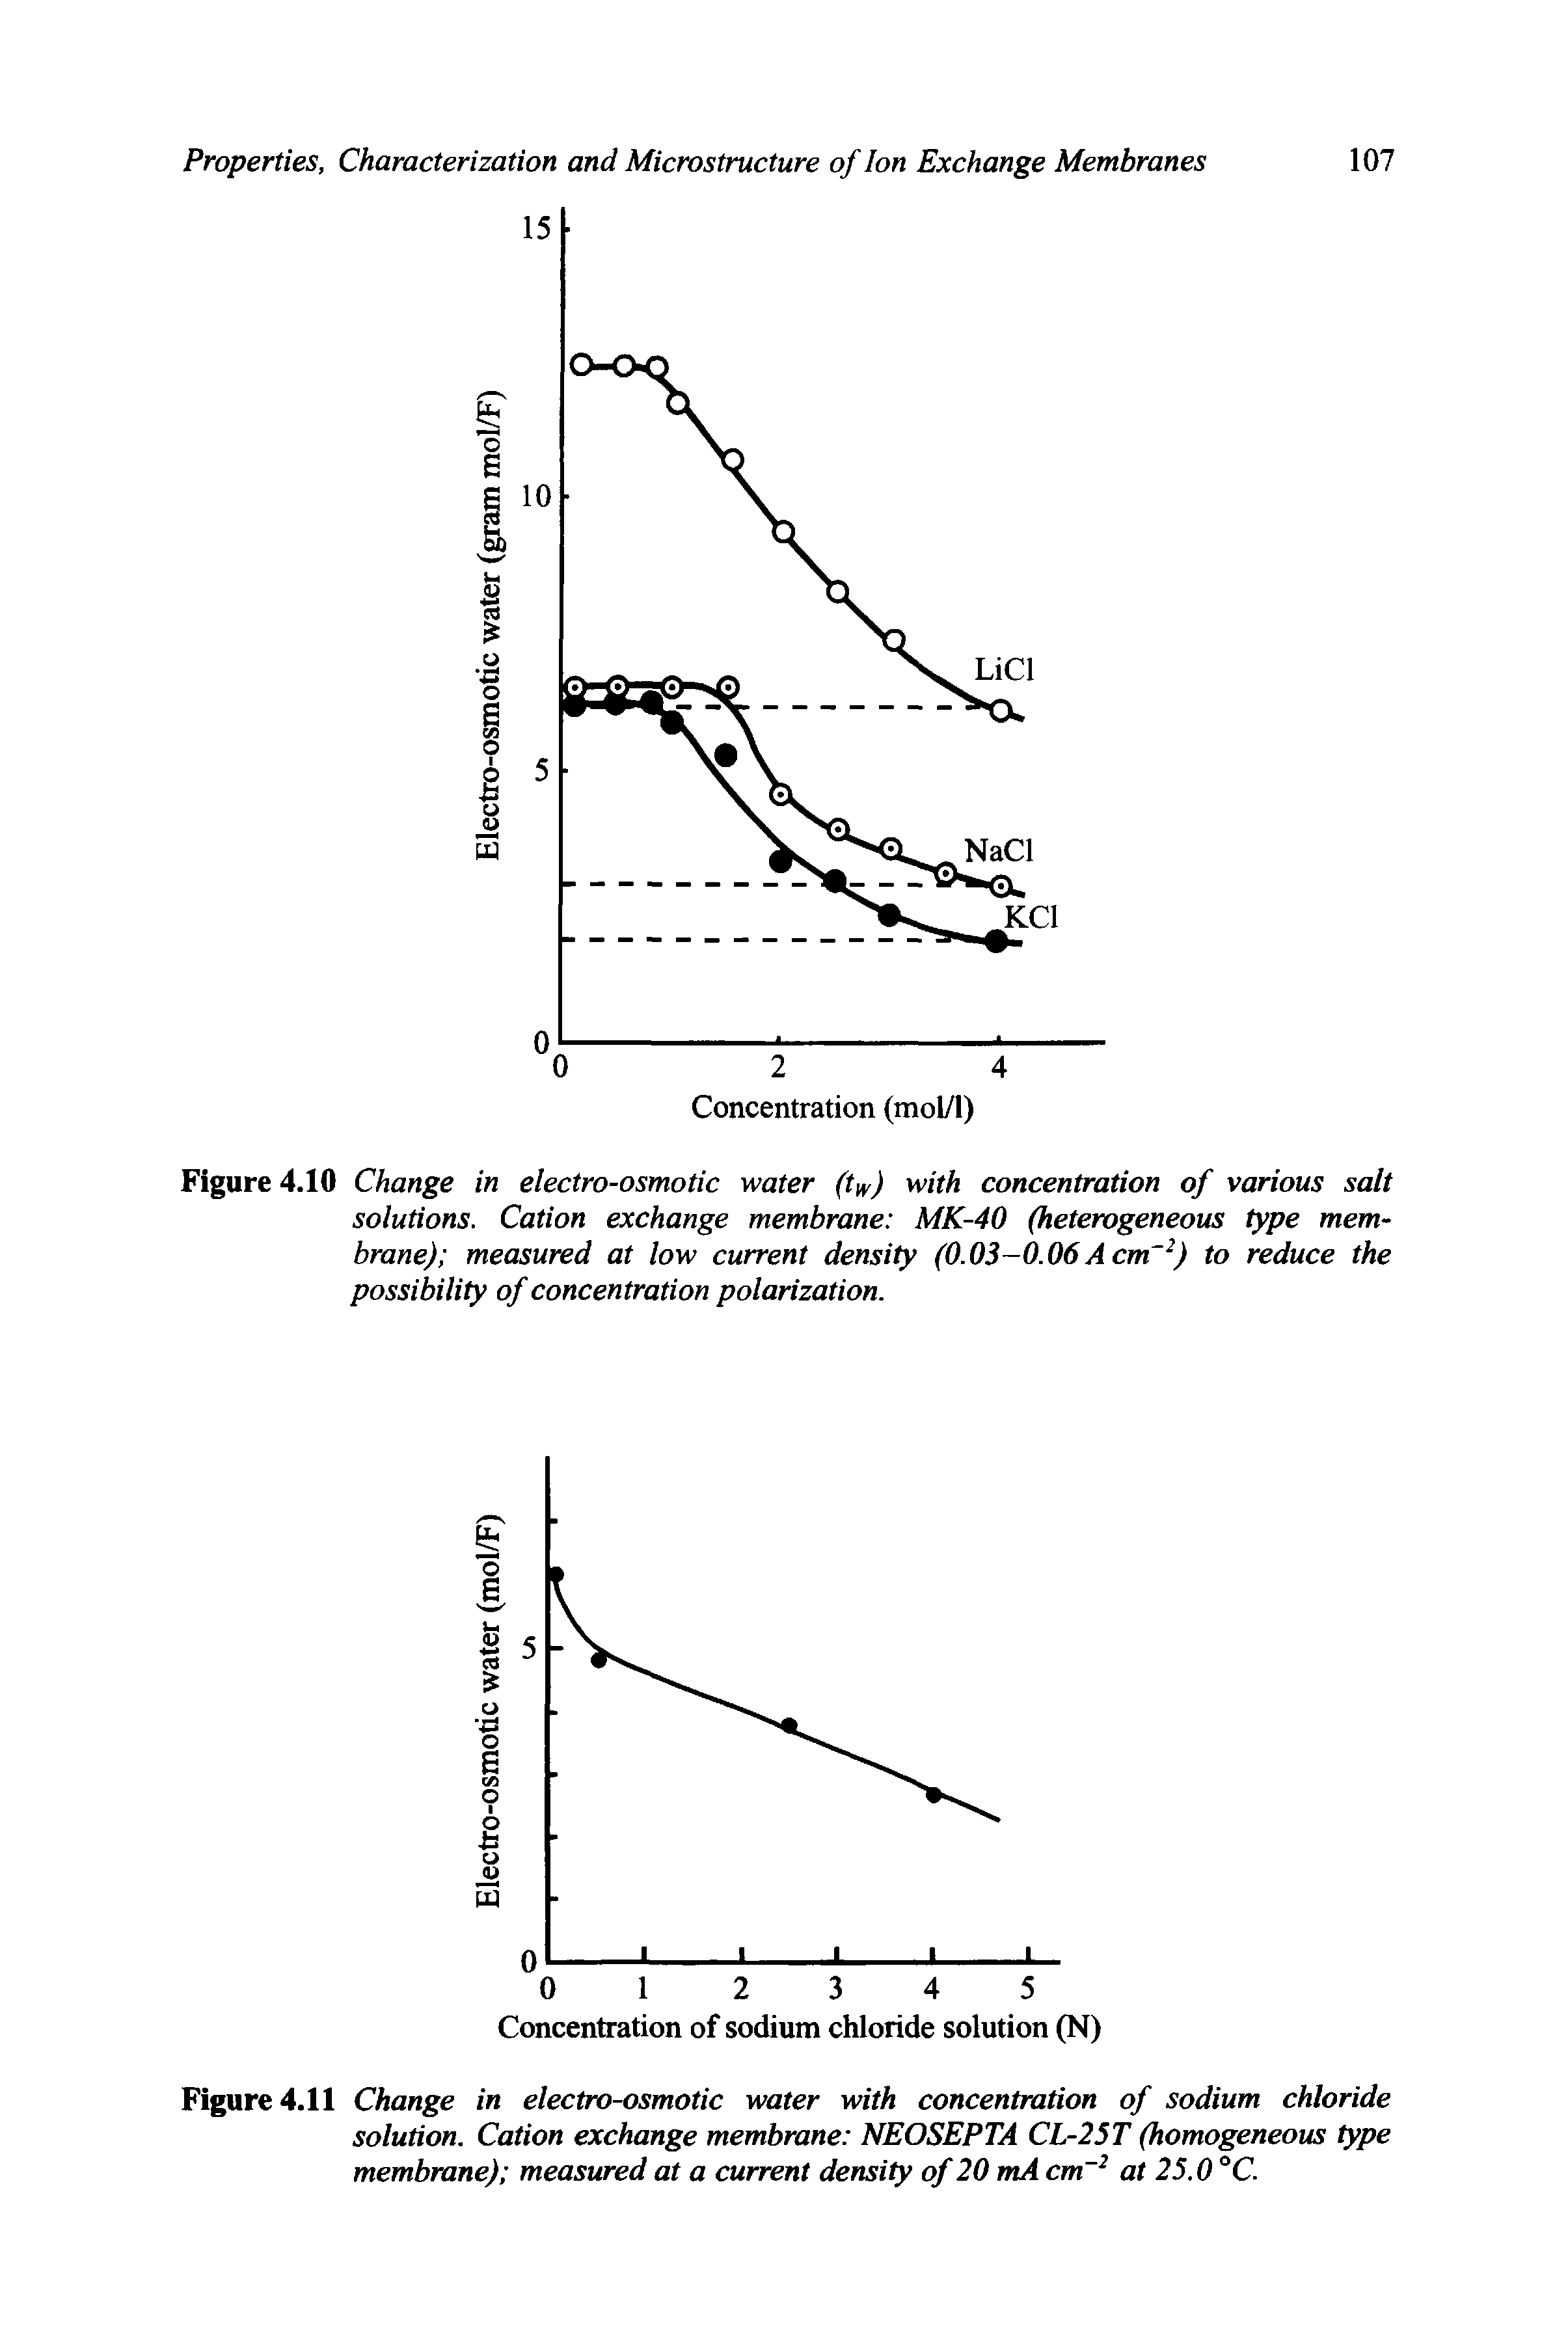 Figure 4.11 Change in electro-osmotic water with concentration of sodium chloride solution. Cation exchange membrane NEOSEPTA CL-25T (homogeneous type membrane) measured at a current density of 20 mA cm 2 at 25.0 °C.